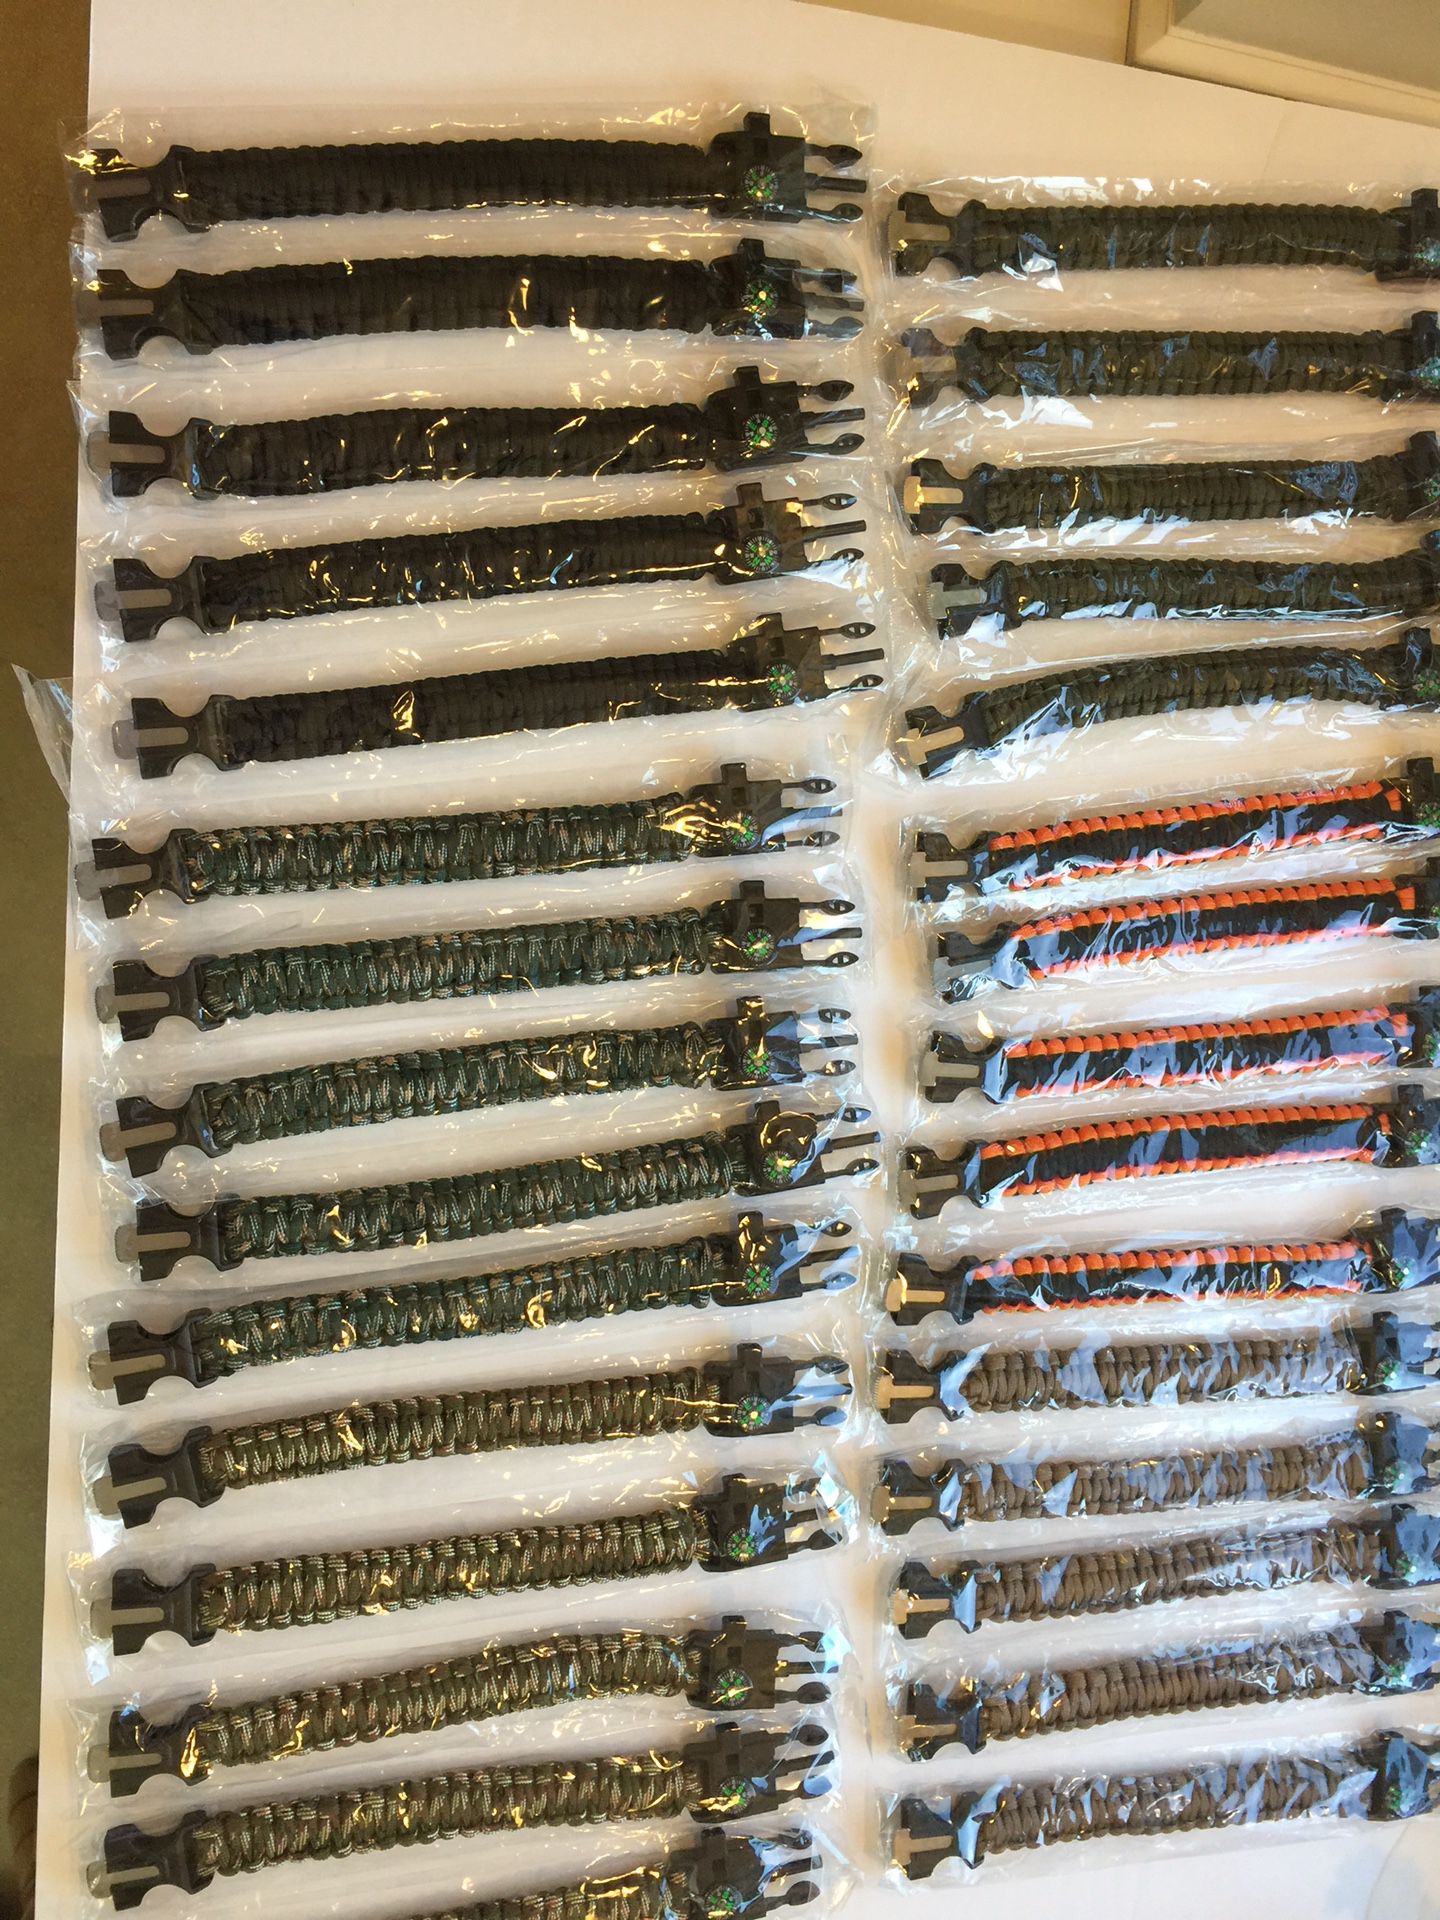 30 survival bracelets all brand new could be used at a resale shop Assorted colors